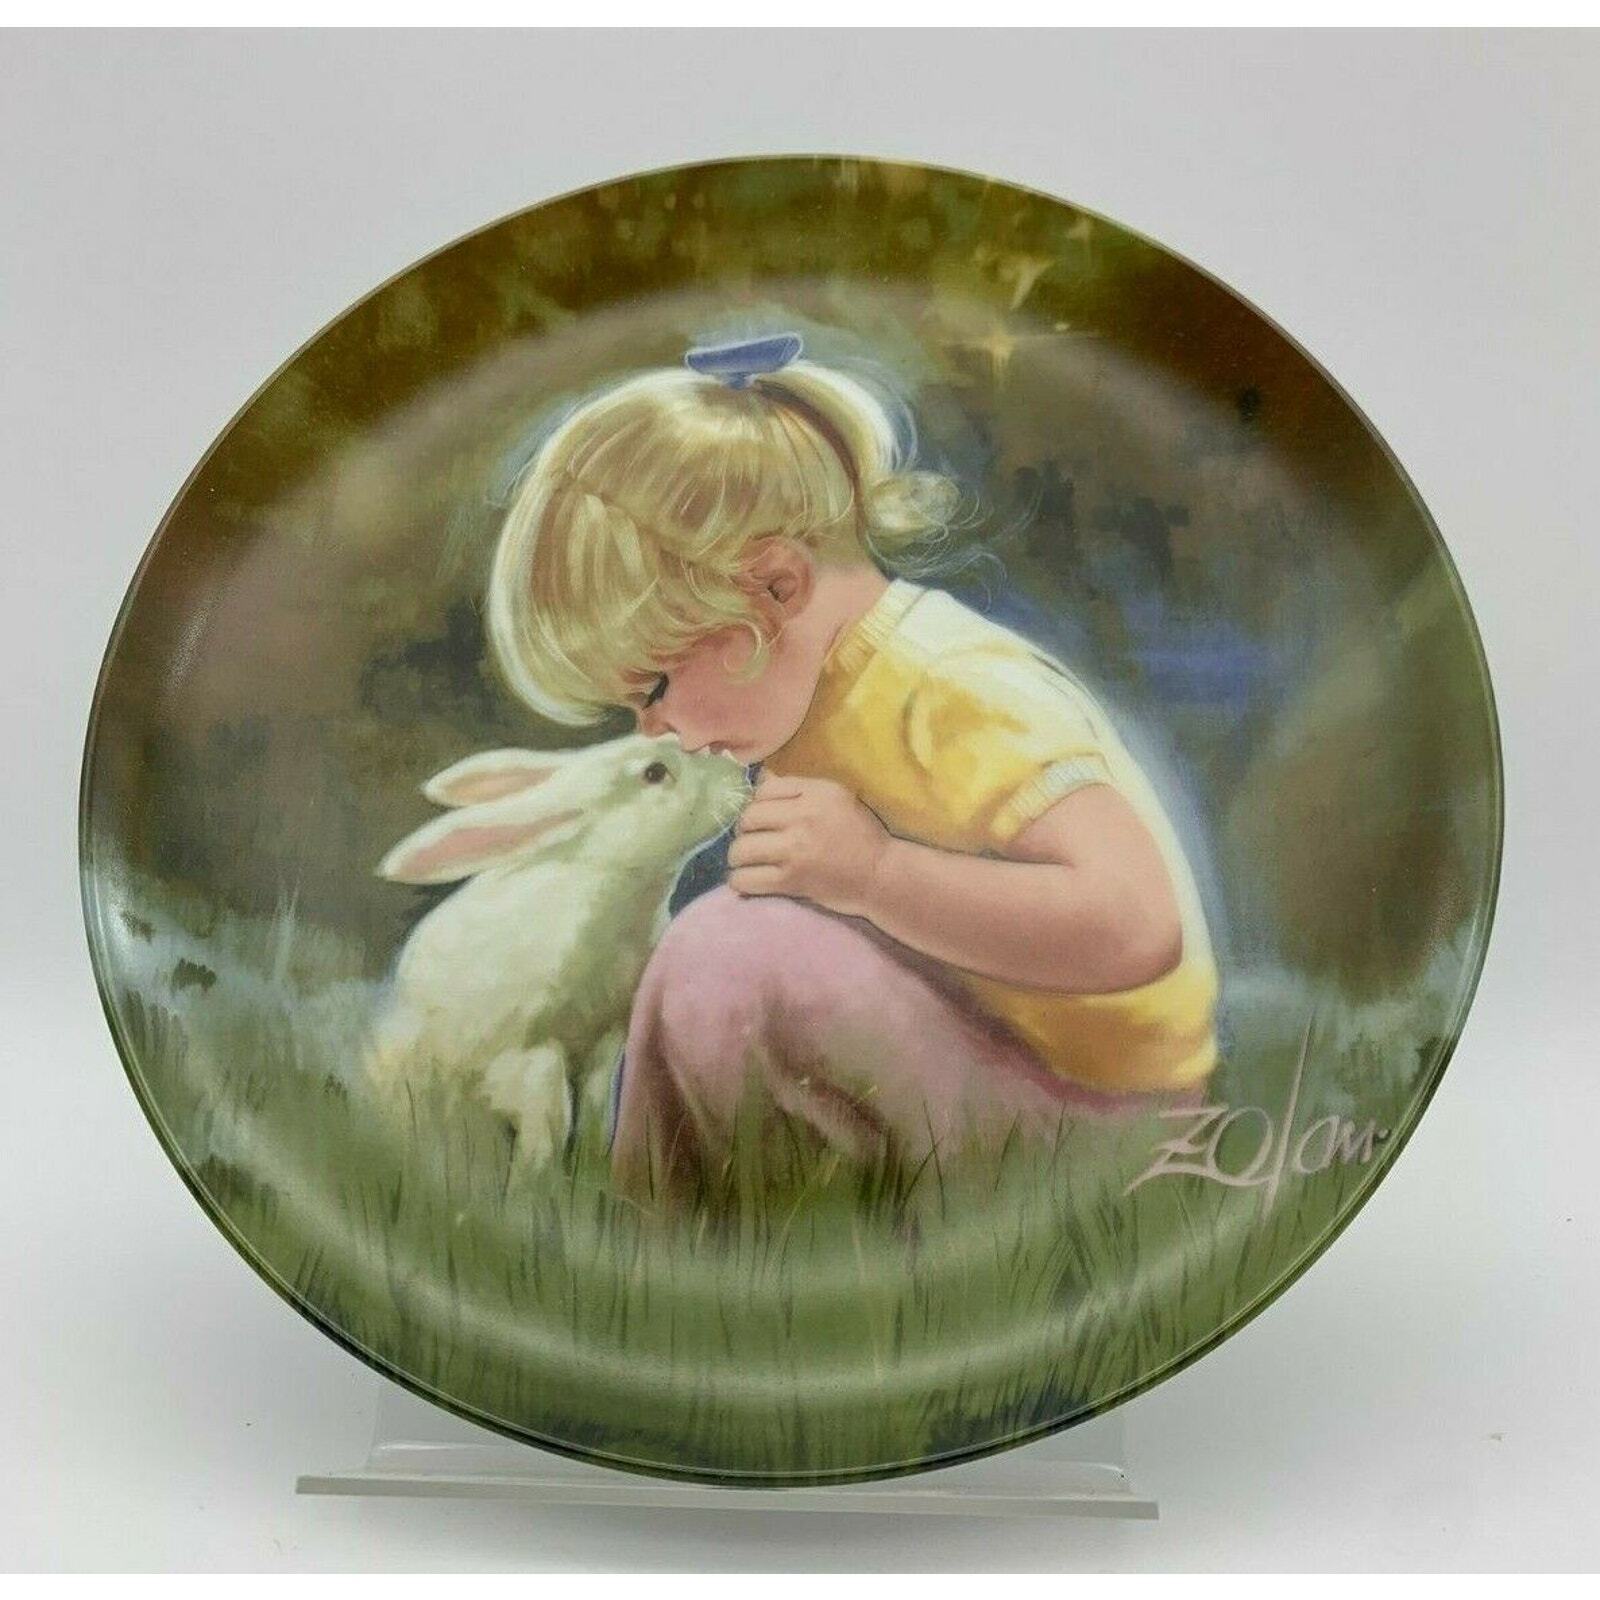 Tender Moment Children and Pets Donald Zolan Collectors Plate Girl with Rabbit